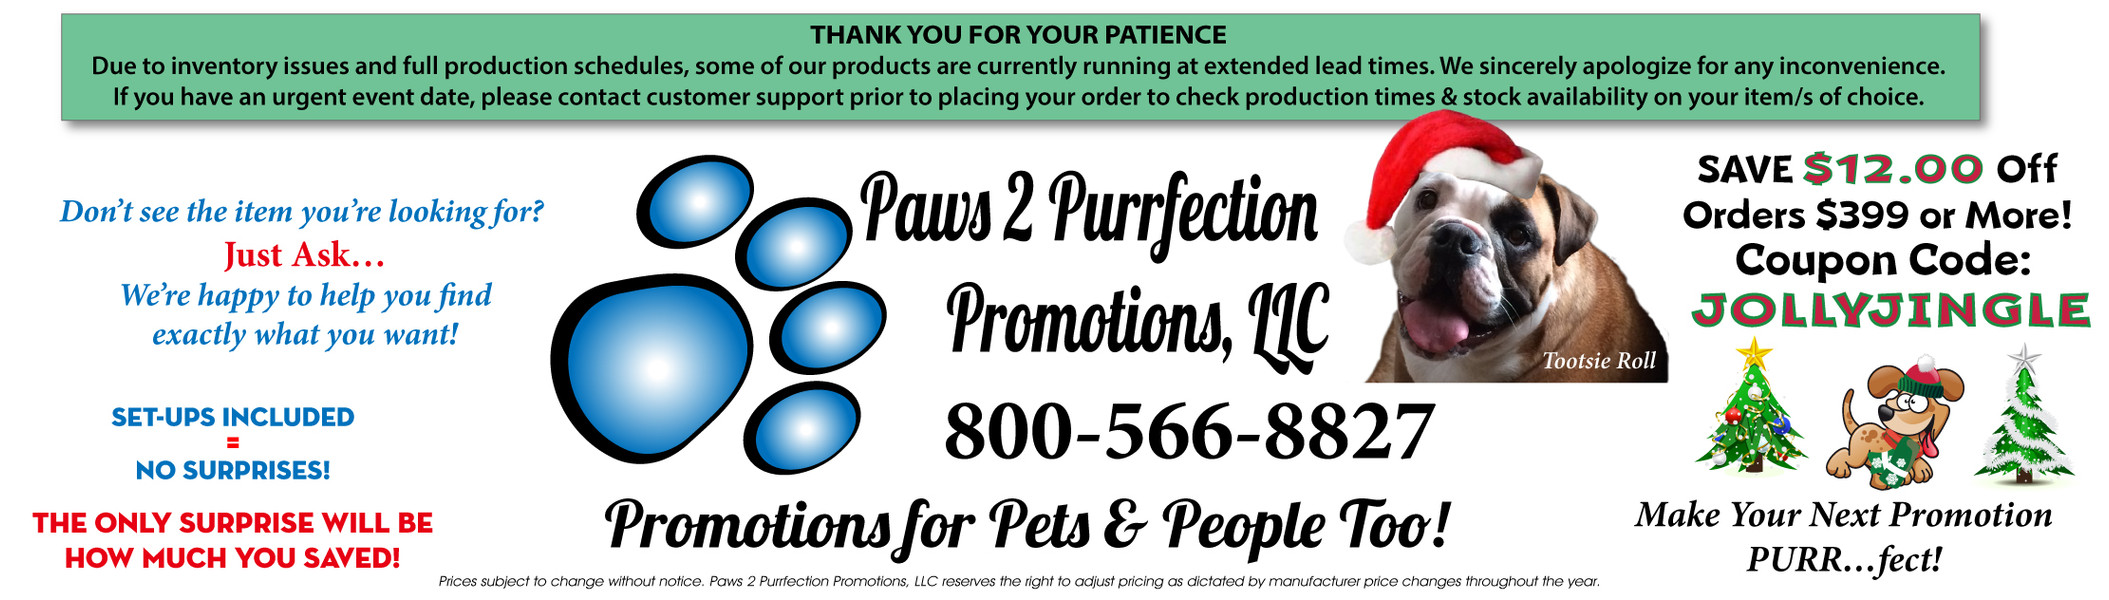 Paws 2 Purrfection Promotions, LLC